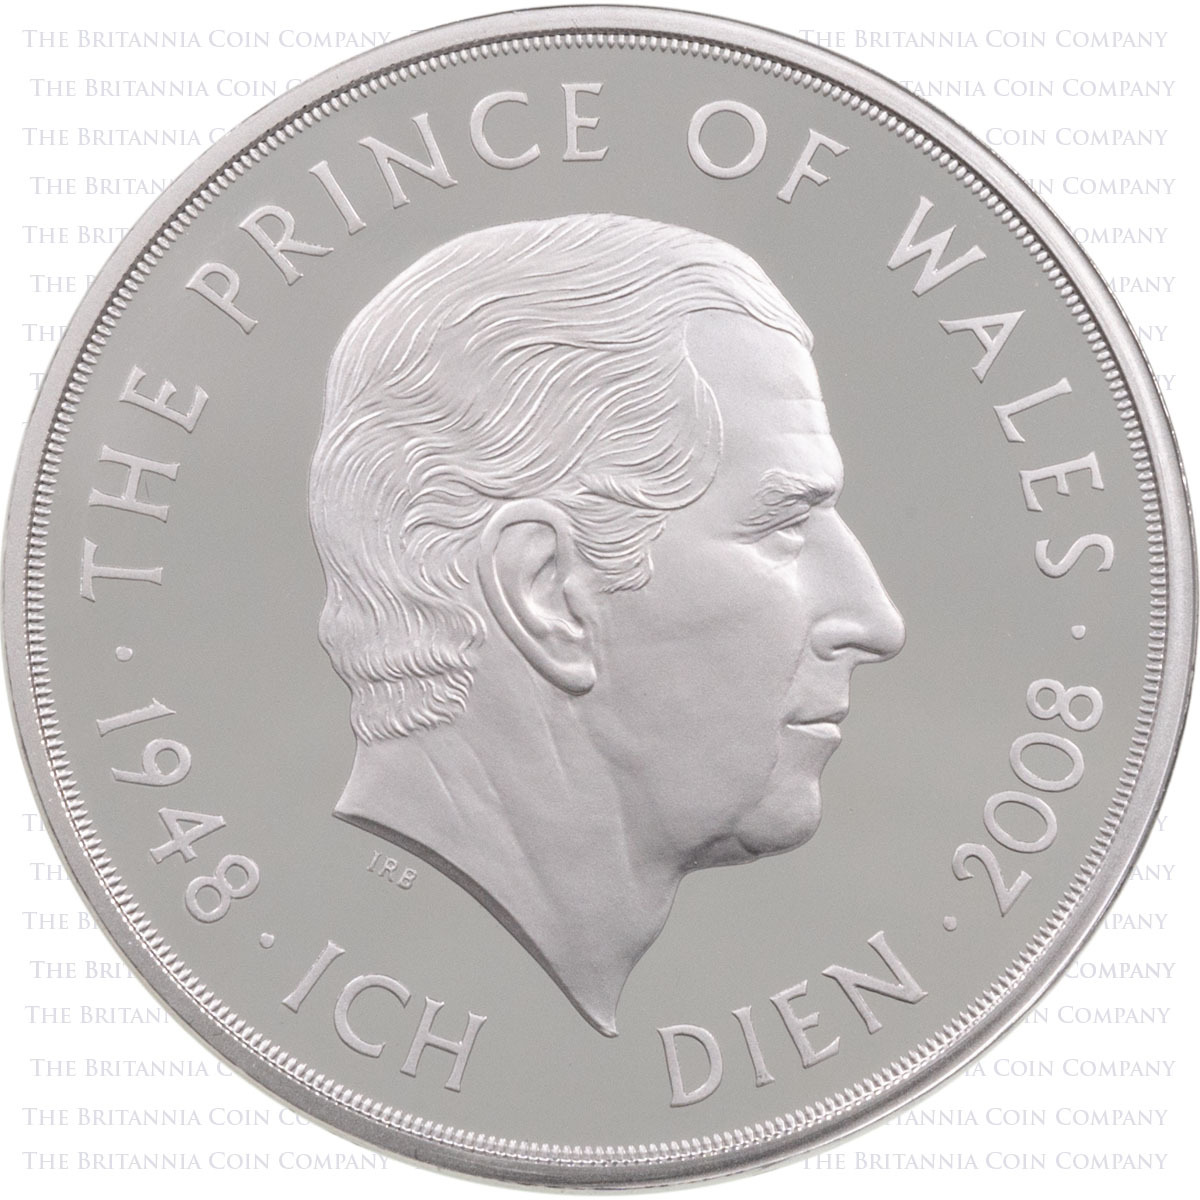 UKPC60PT 2008 Charles Prince Of Wales 60th Birthday Five Pound Crown Piedfort Platinum Proof Coin Reverse